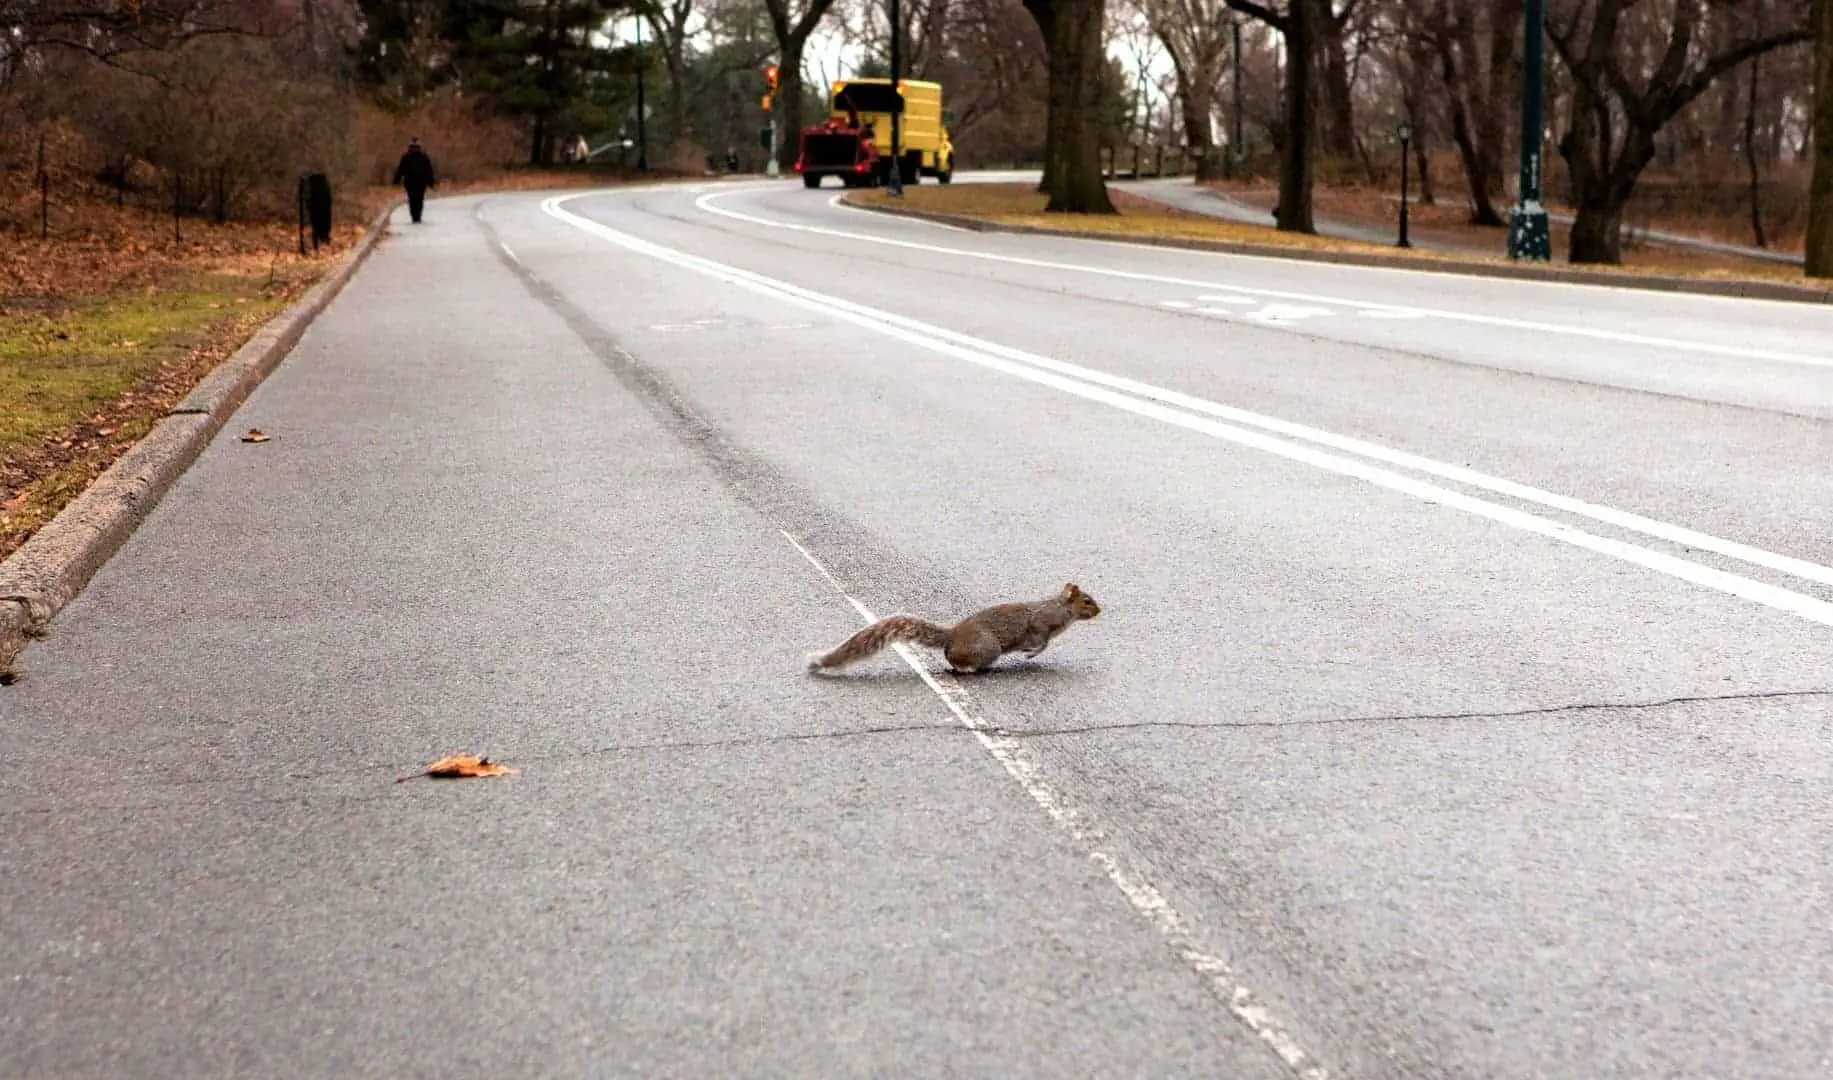 Why Do Squirrels Run In Front Of Cars? (Video)